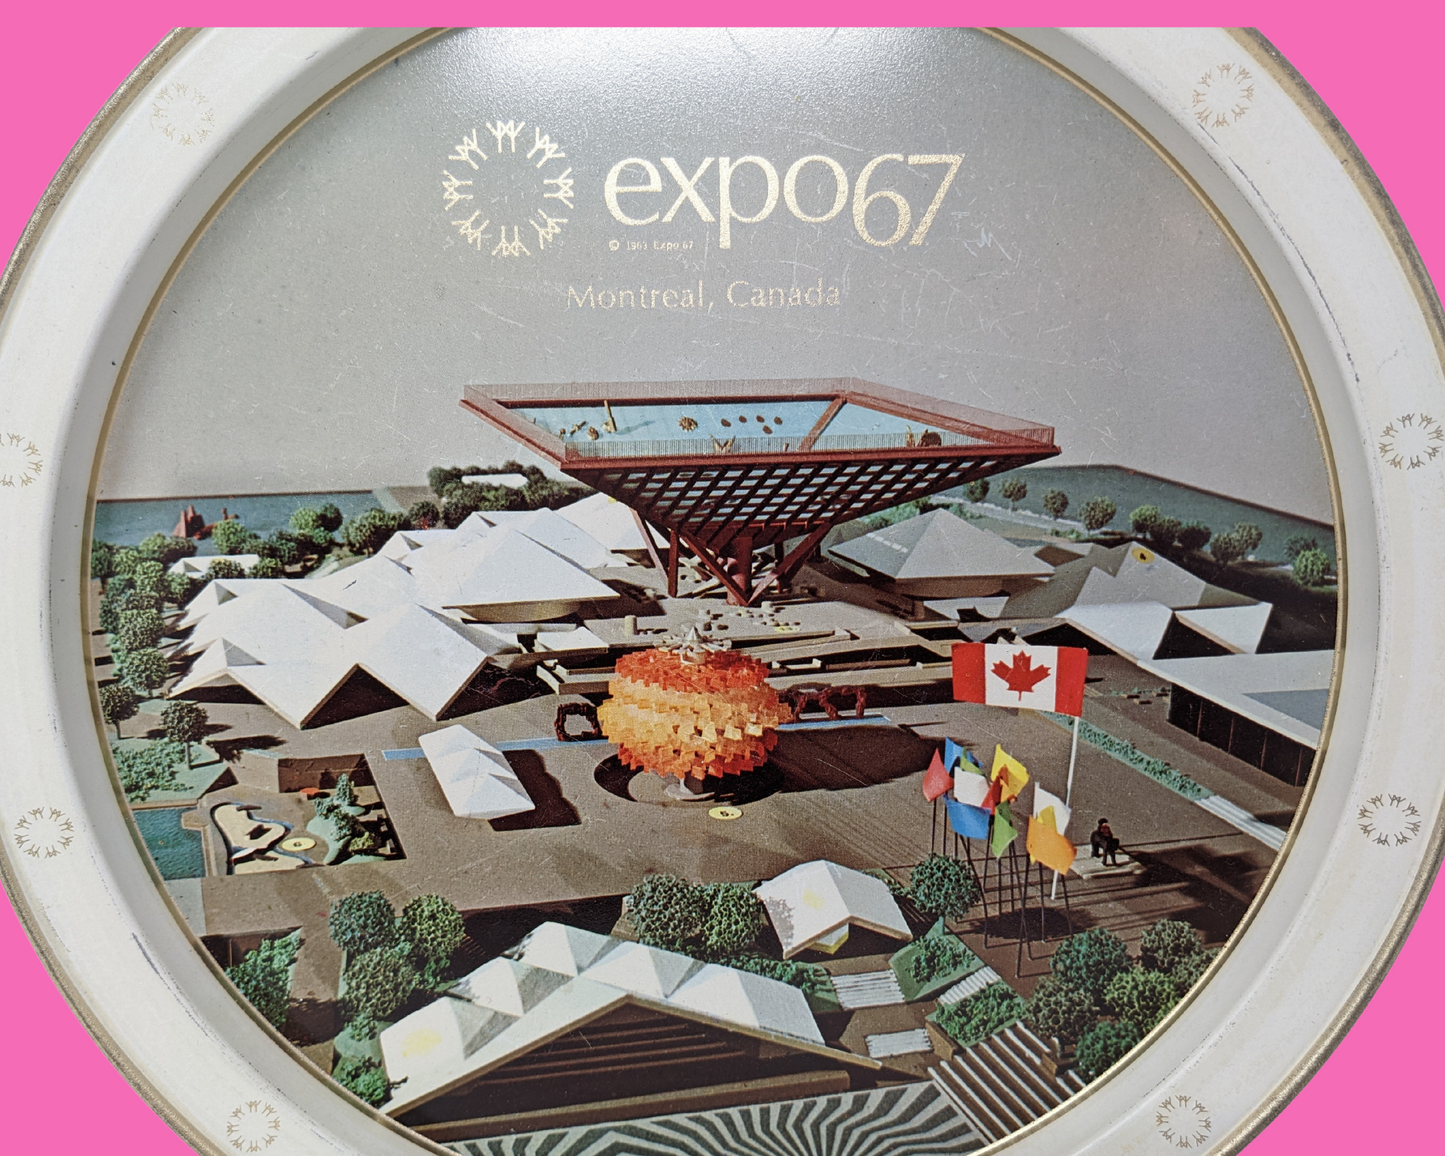 Vintage 1967 Decorative Metal Tray of Montreal's Expo 67 Pavilion of Canada